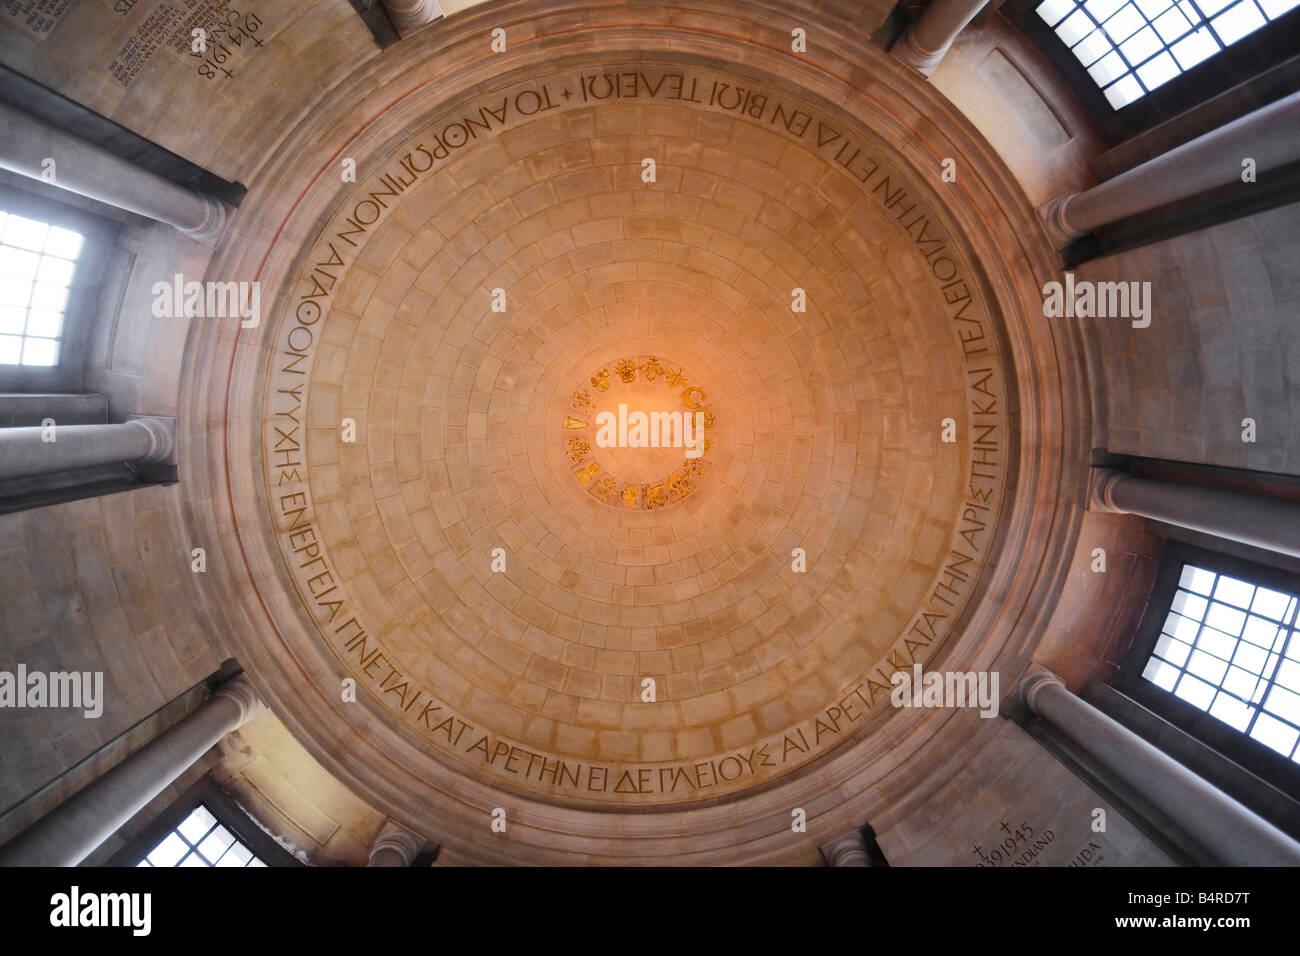 Oxford, England. A view of the Ceiling in the entry to Rhodes House Library, Oxford. Stock Photo